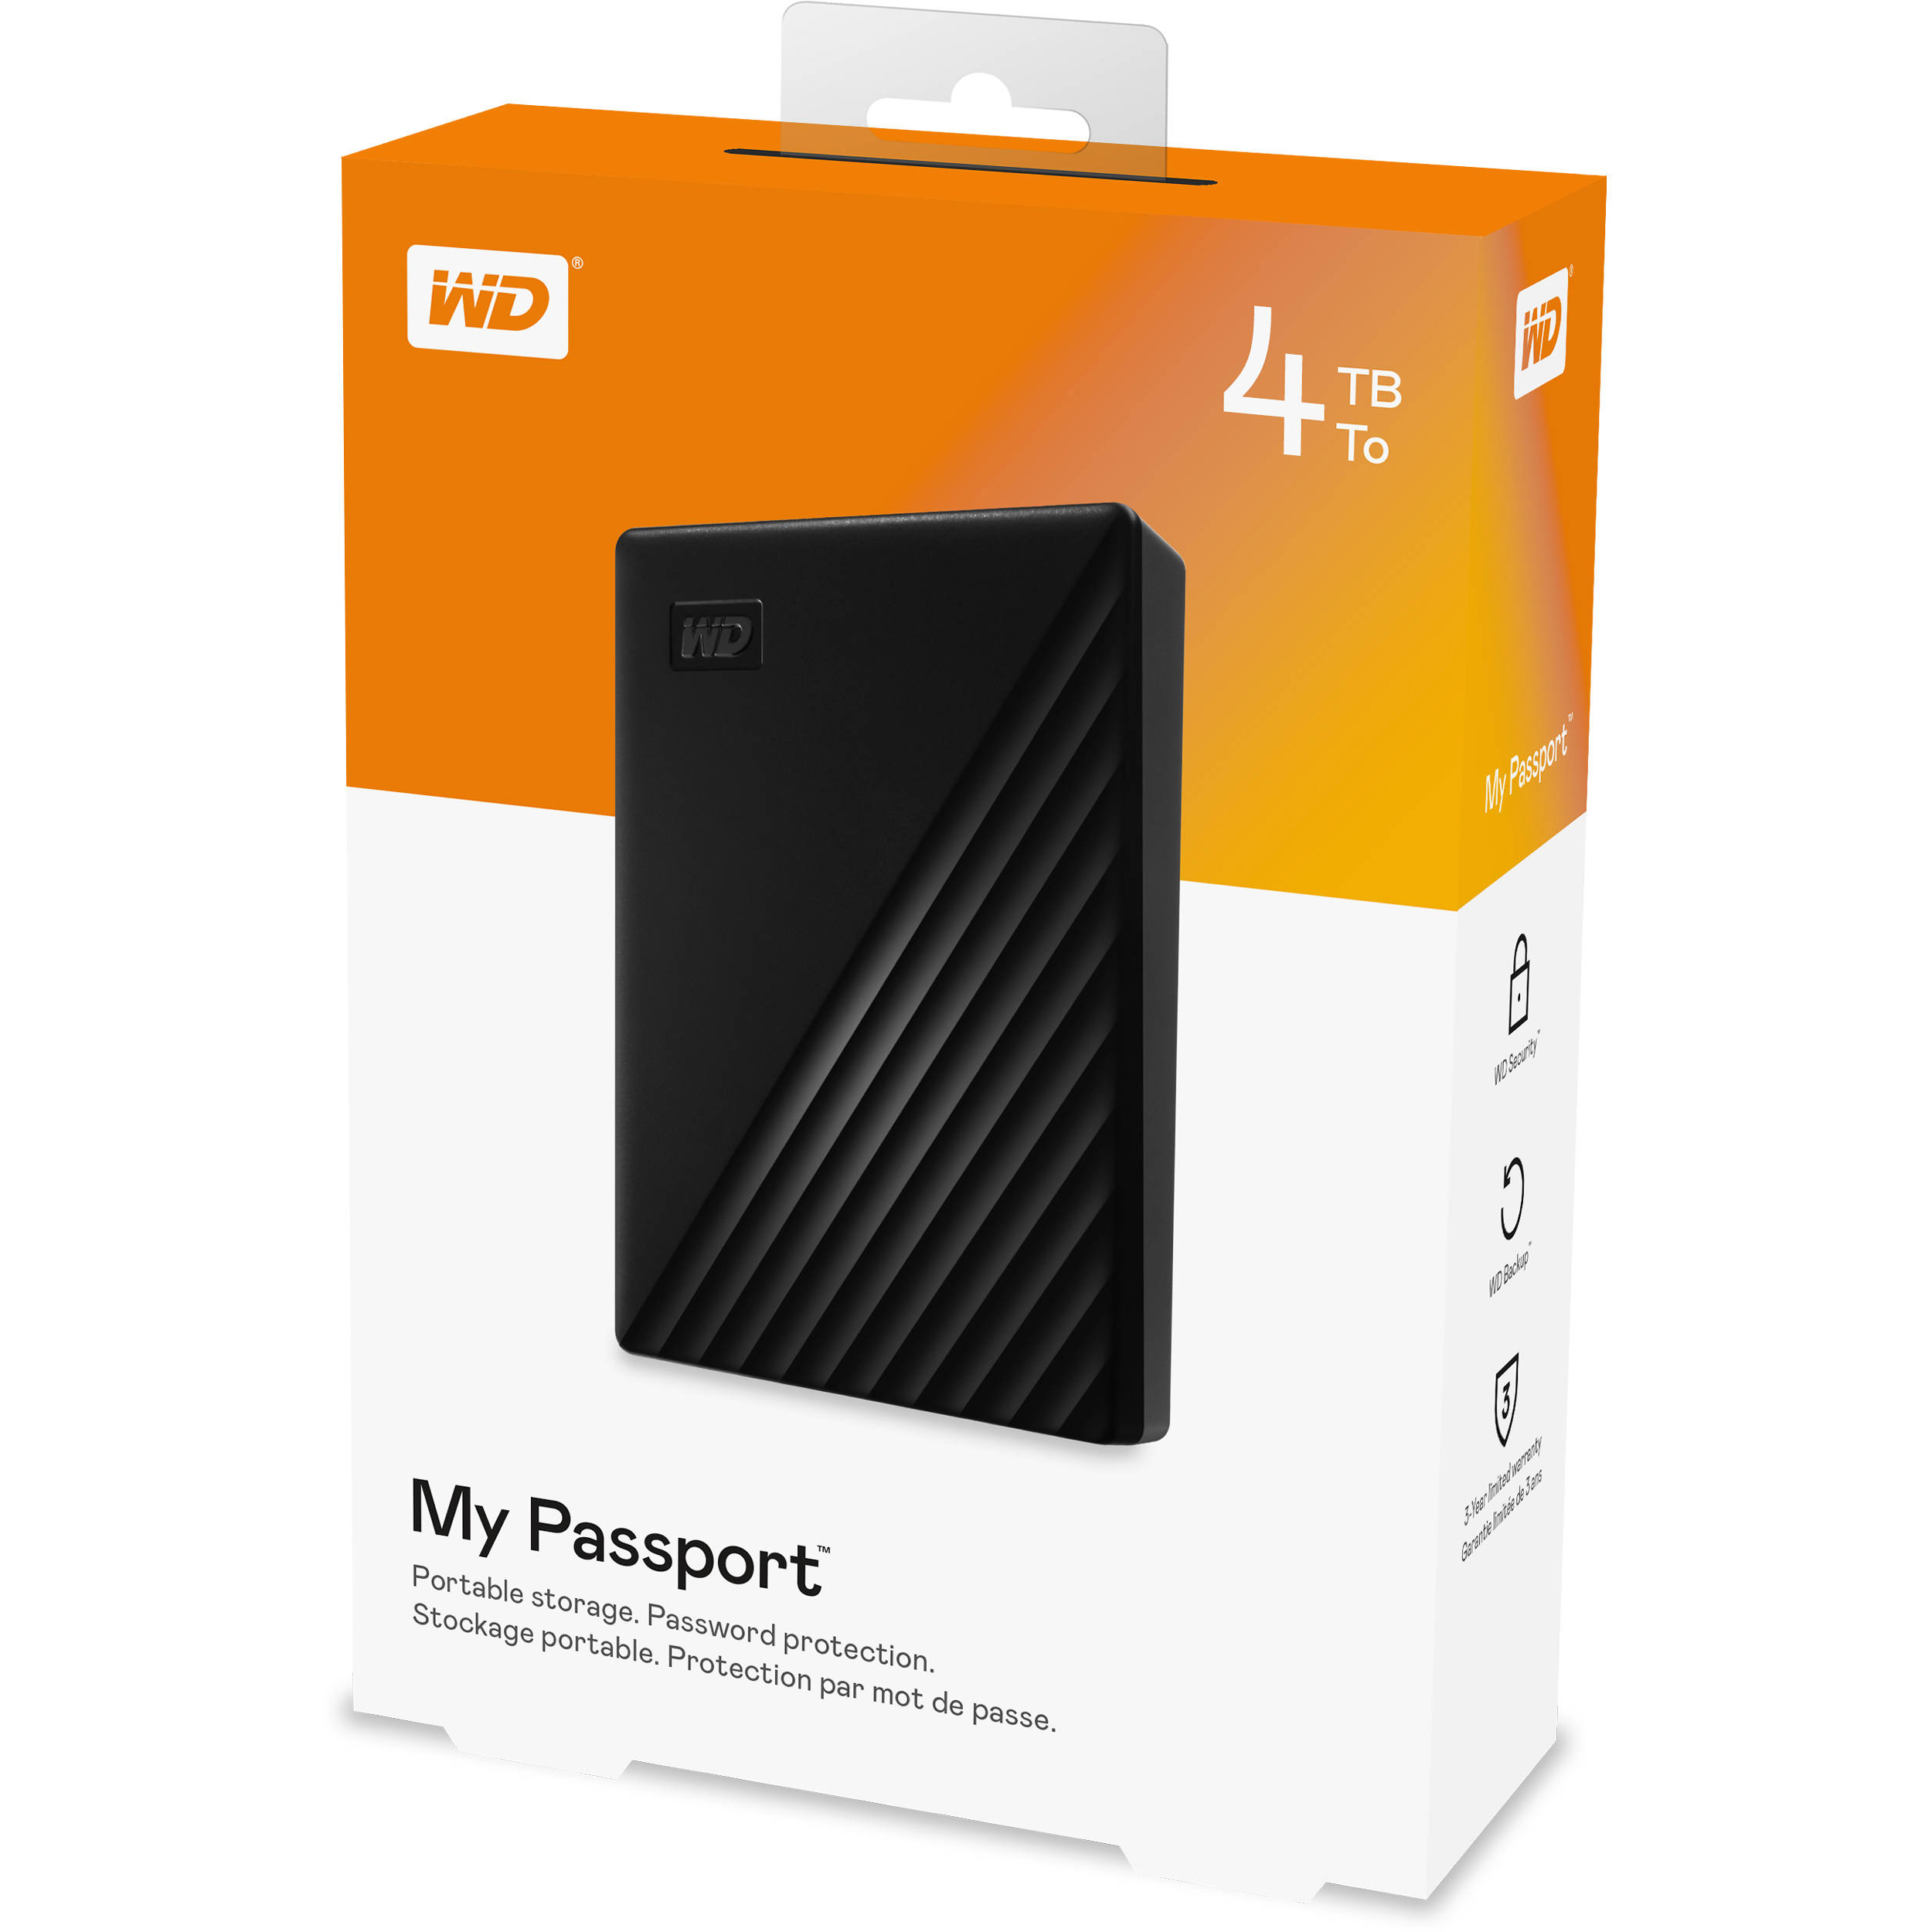 Western Digital WD 4TB My Passport Portable External Hard Drive, Black – with Automatic Backup, 256Bit AES Hardware & Protection - Al Ameen Computers